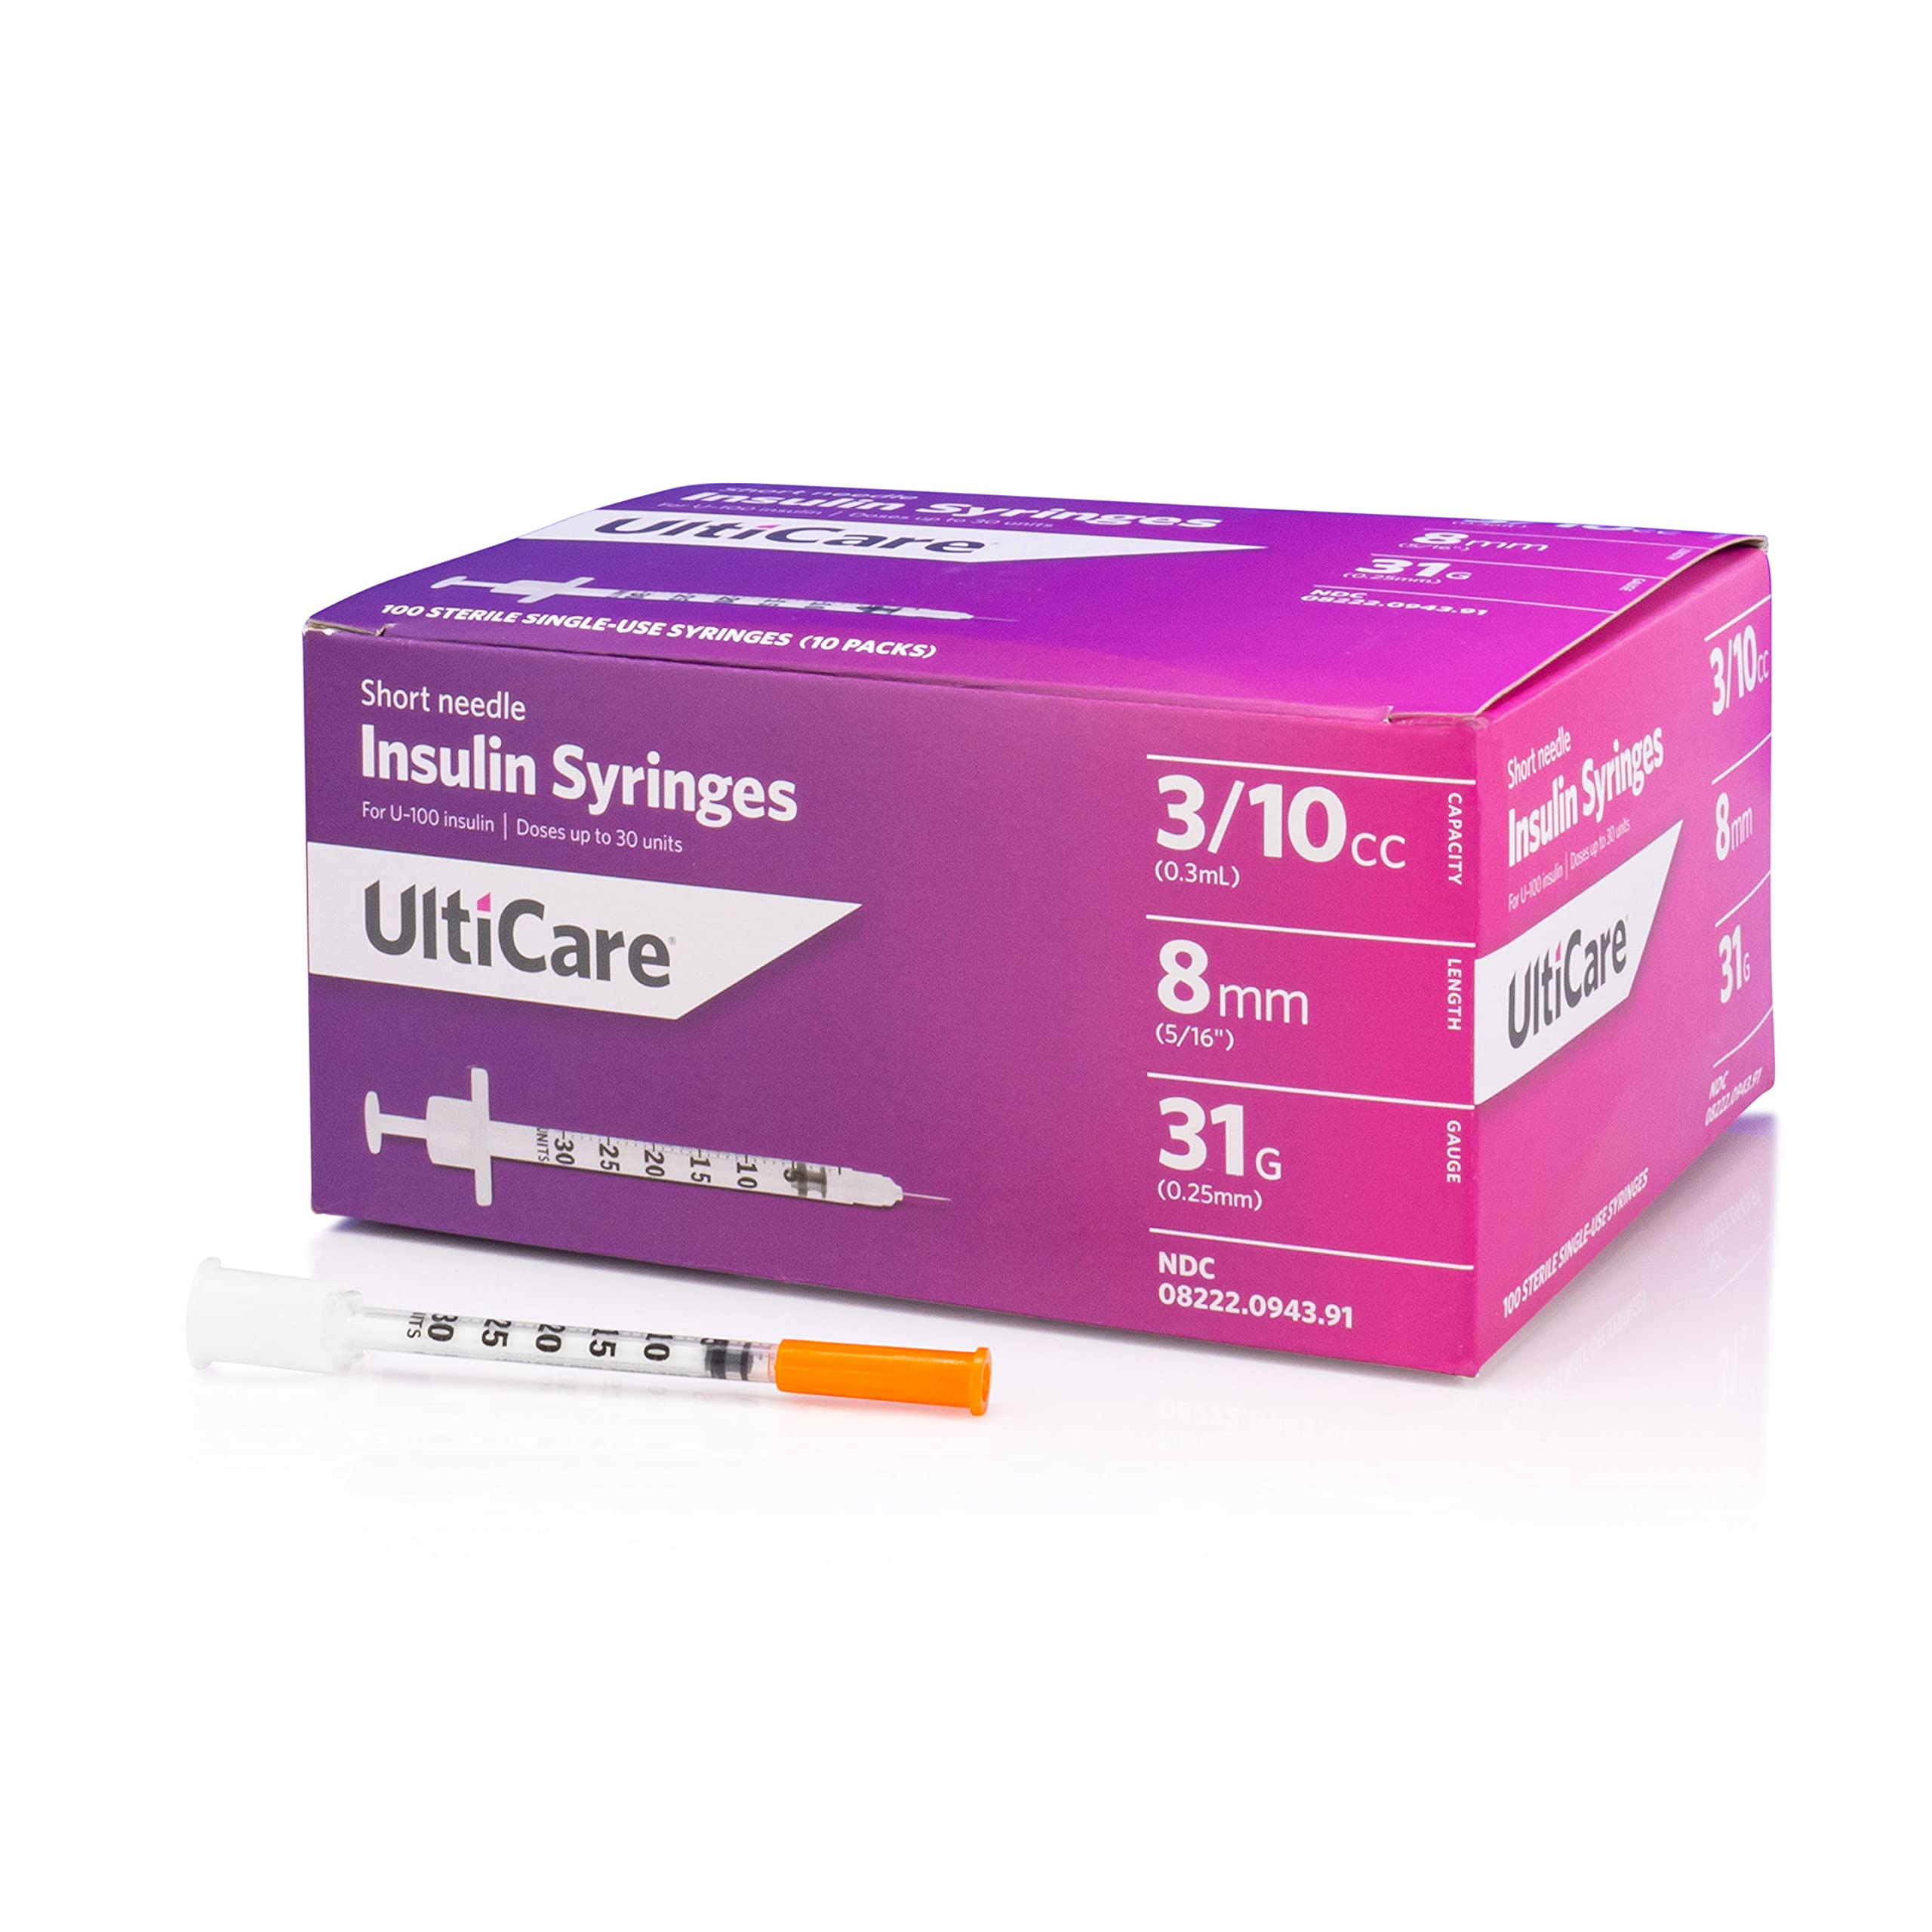 UltiCare U-100 Insulin Syringes, Comfortable and Accurate Dosing of Insulin, Compatible with Any U-100 Strength Insulin, Size: 3/10cc, 31G x 8mm, 100 ct Box